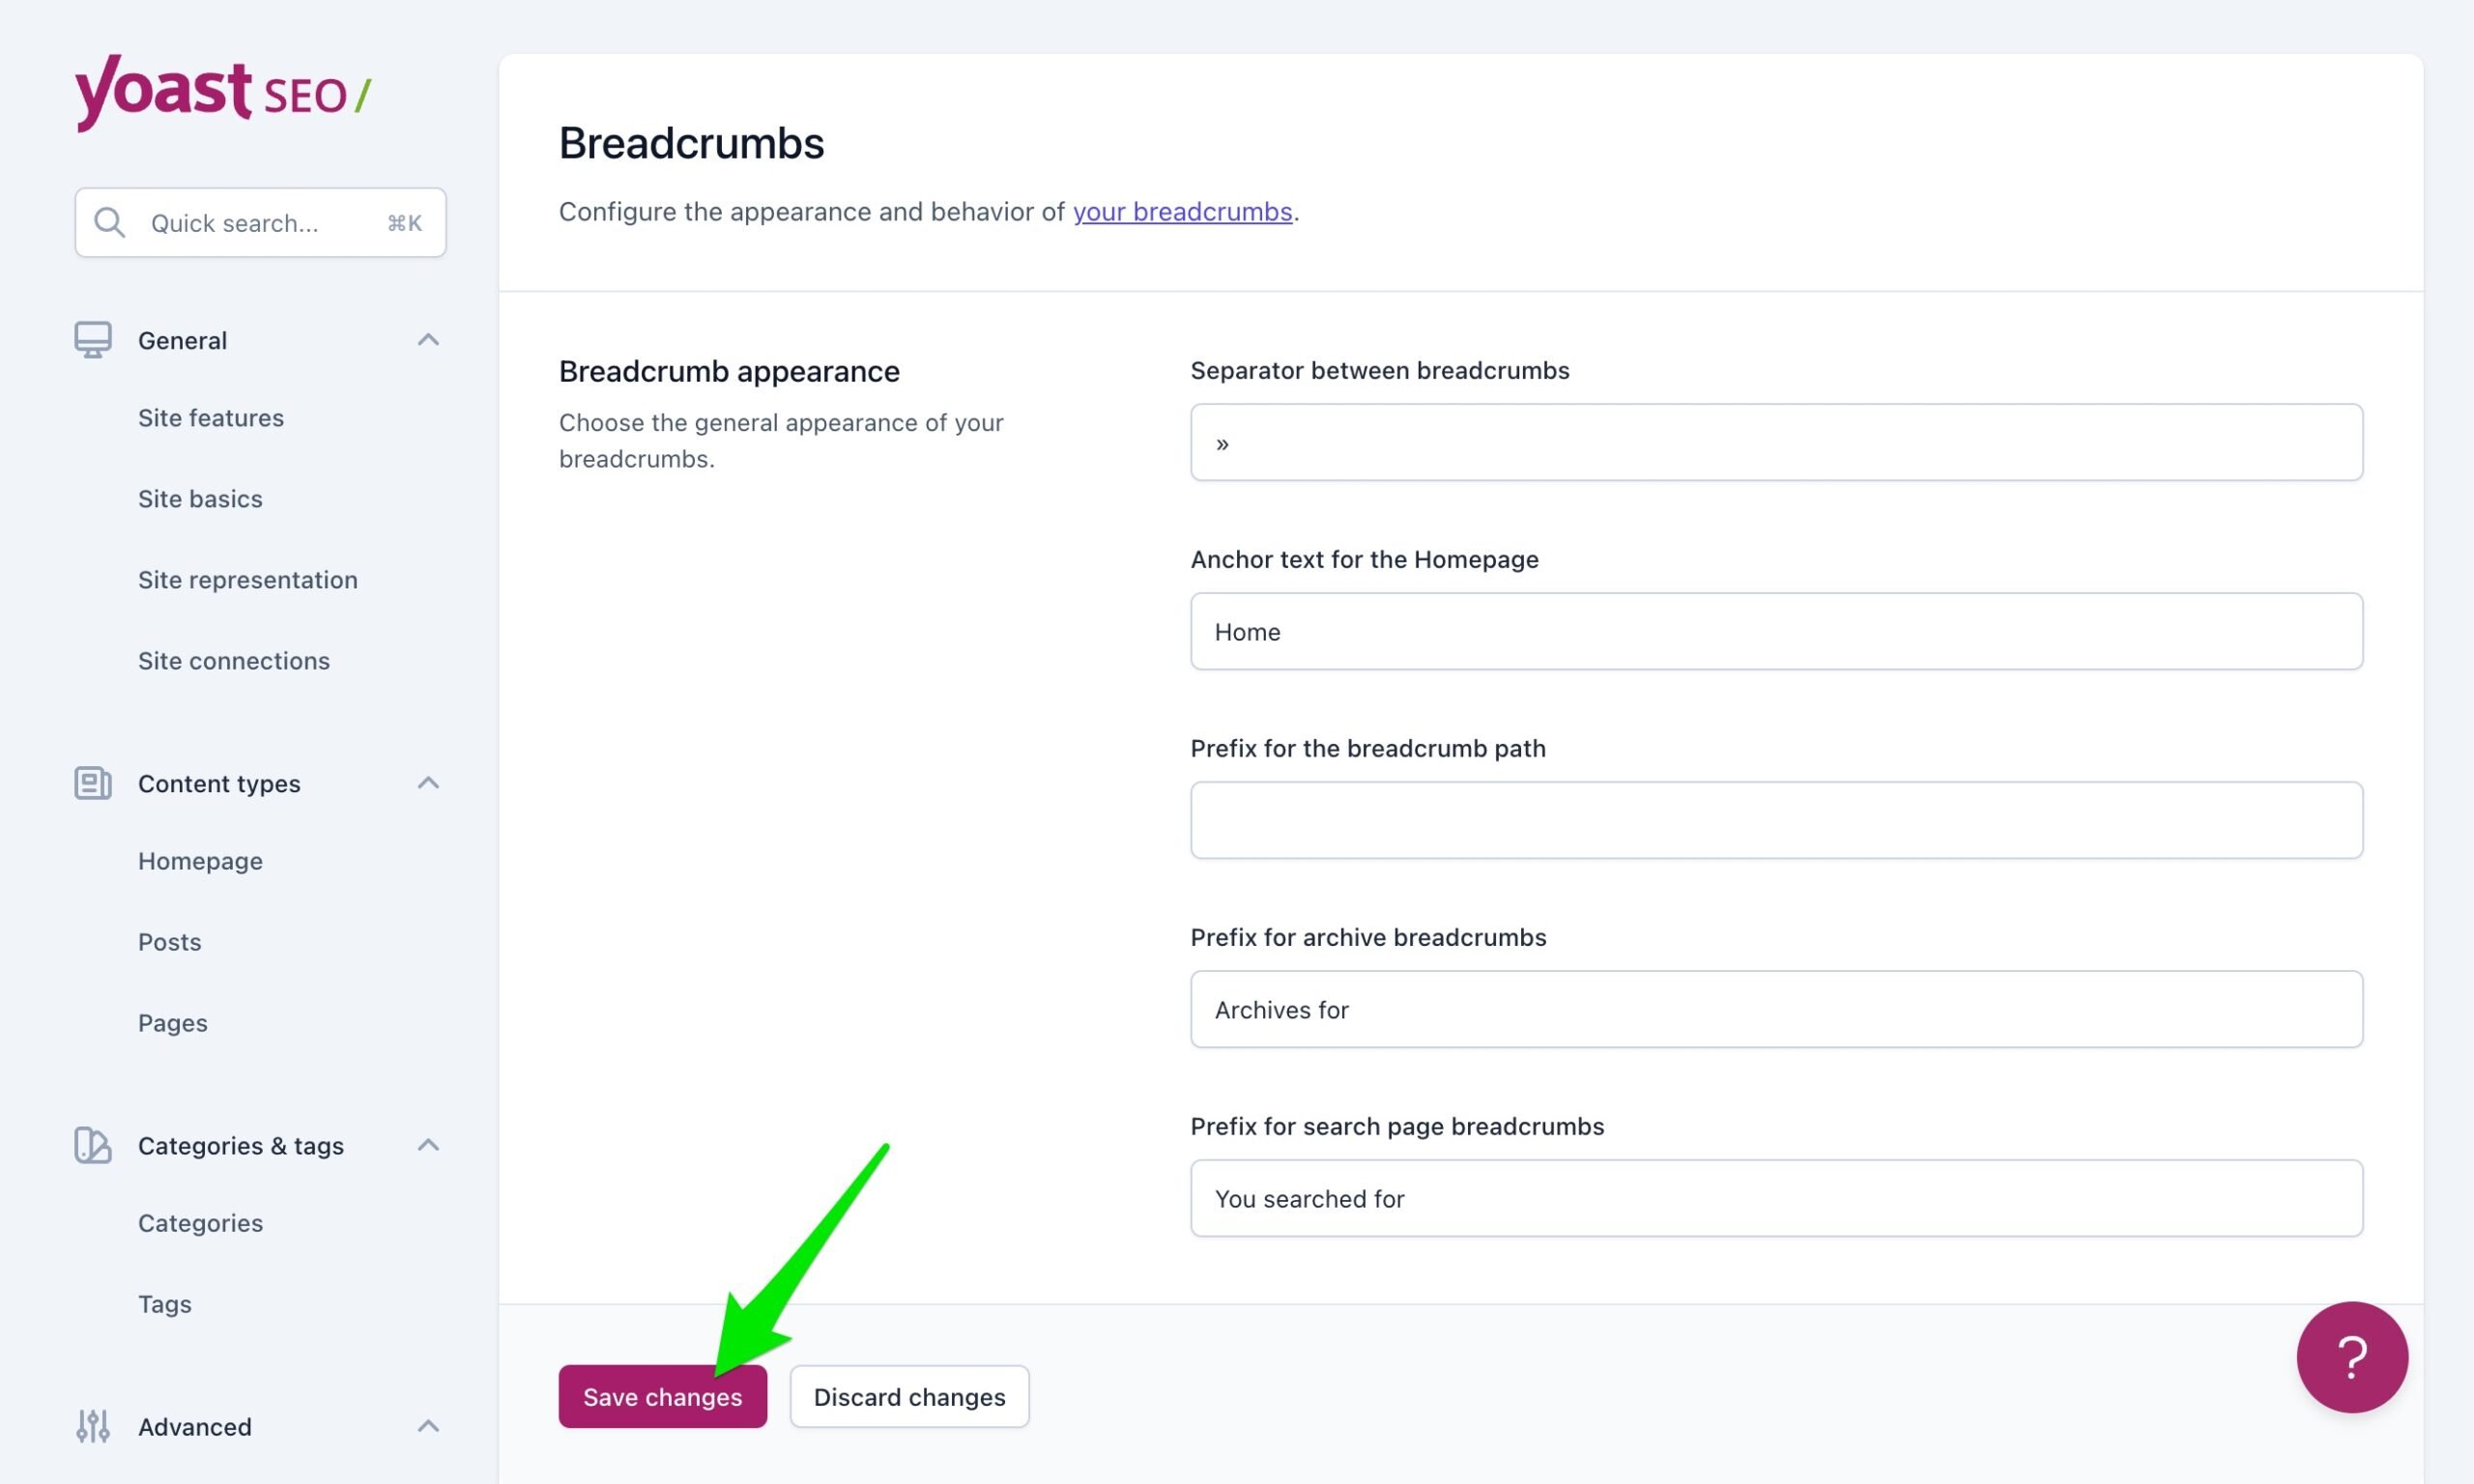 Screenshot of the "Save changes" button on the Breadcrumbs settings page in Yoast SEO.